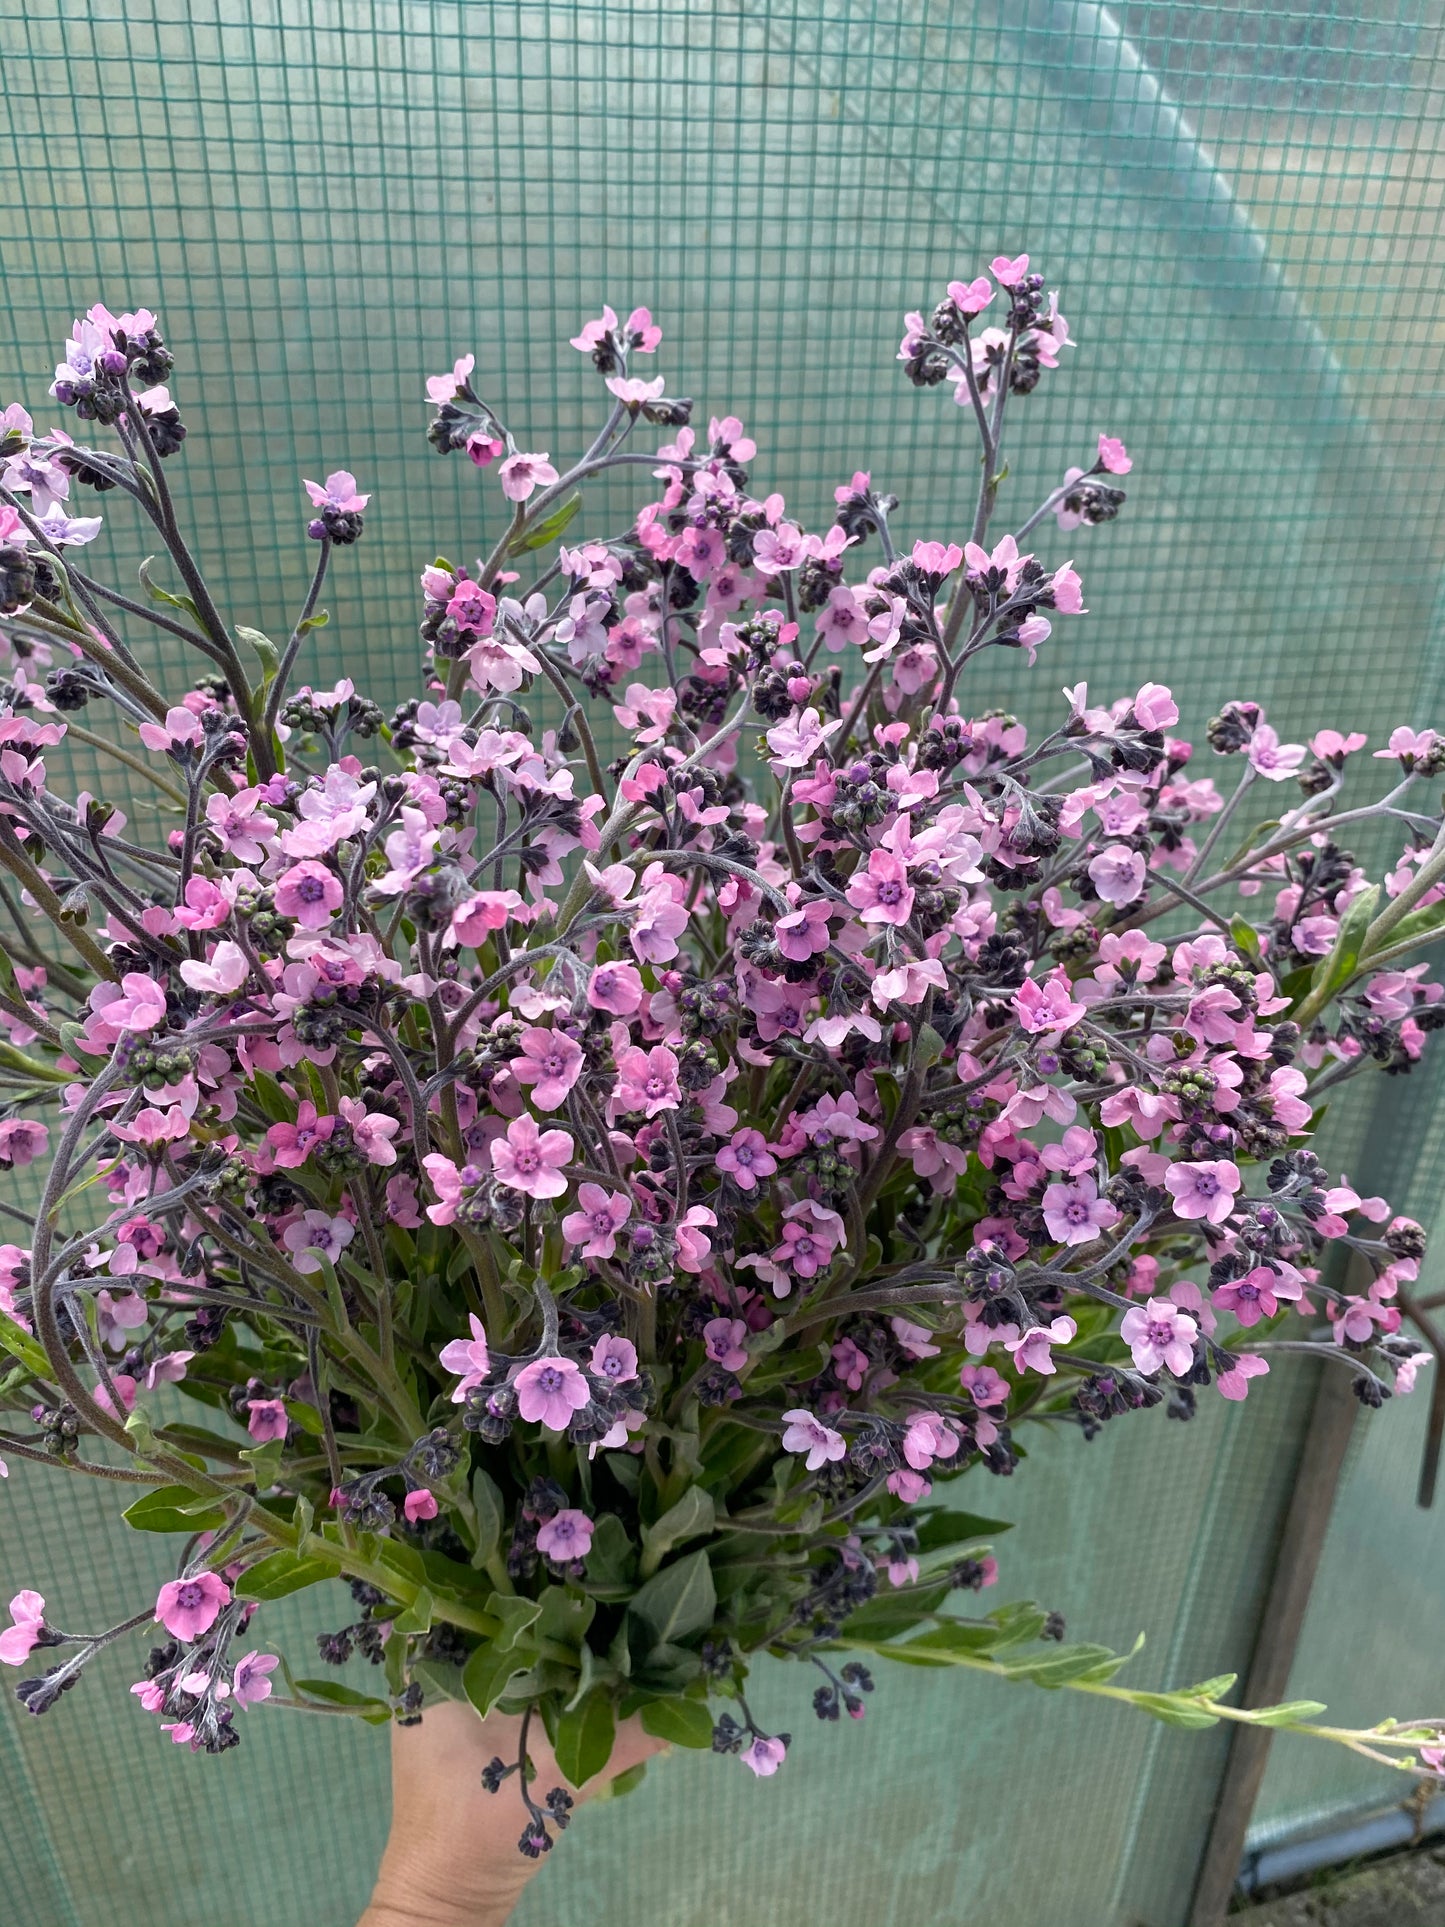 Chinese forget-me-nots "Mystic Pink"